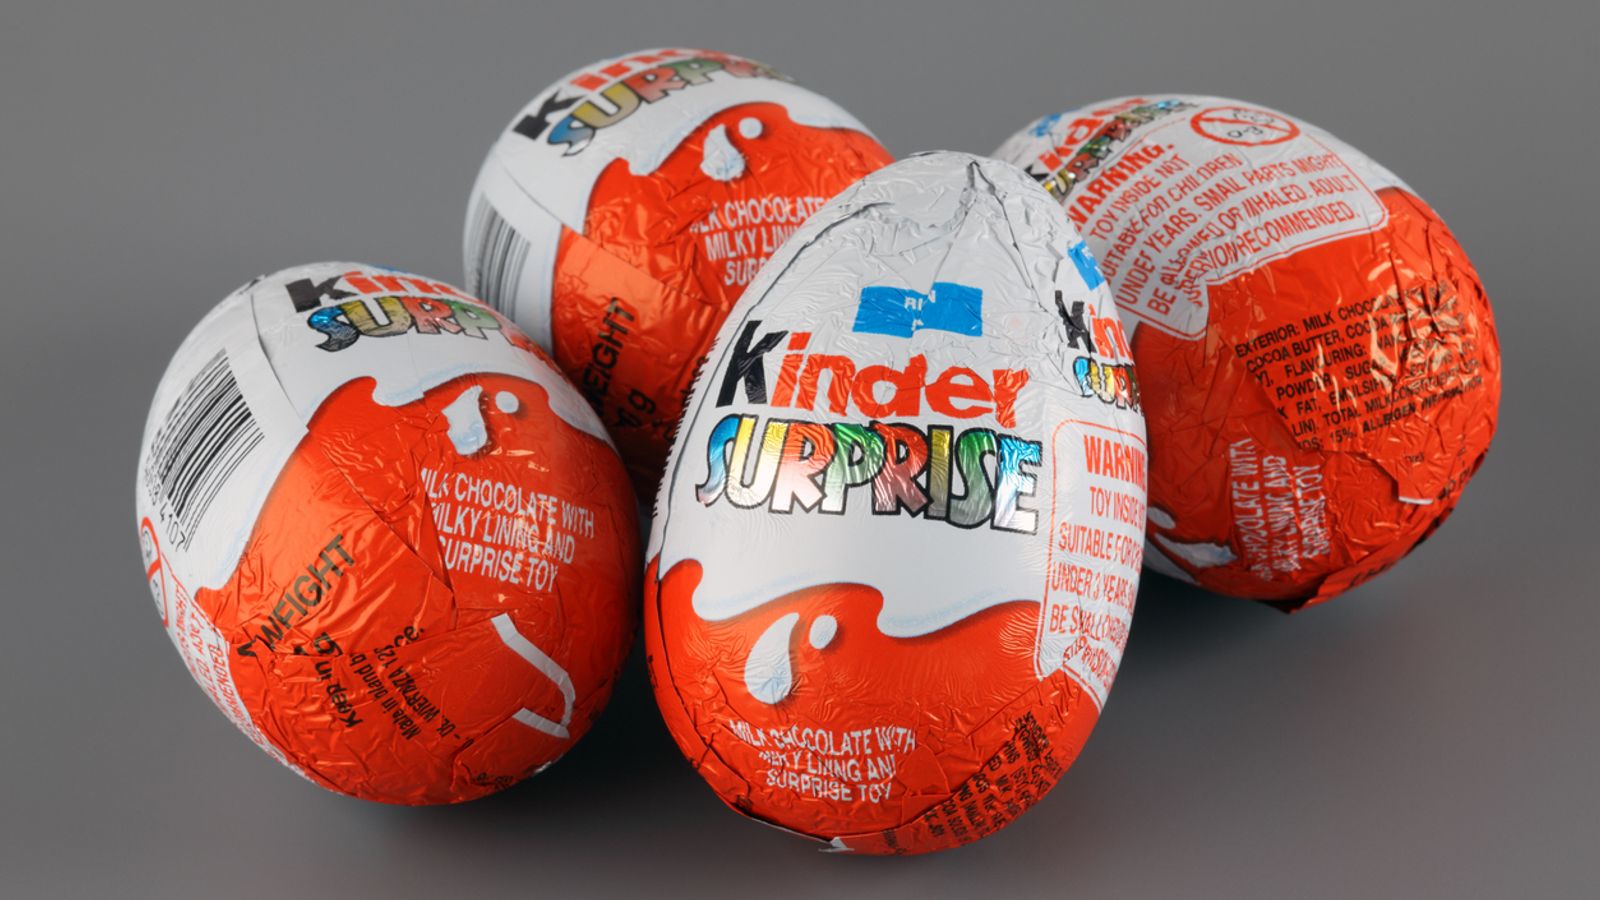 Kinder Surprise chocolate eggs recalled over salmonella fears